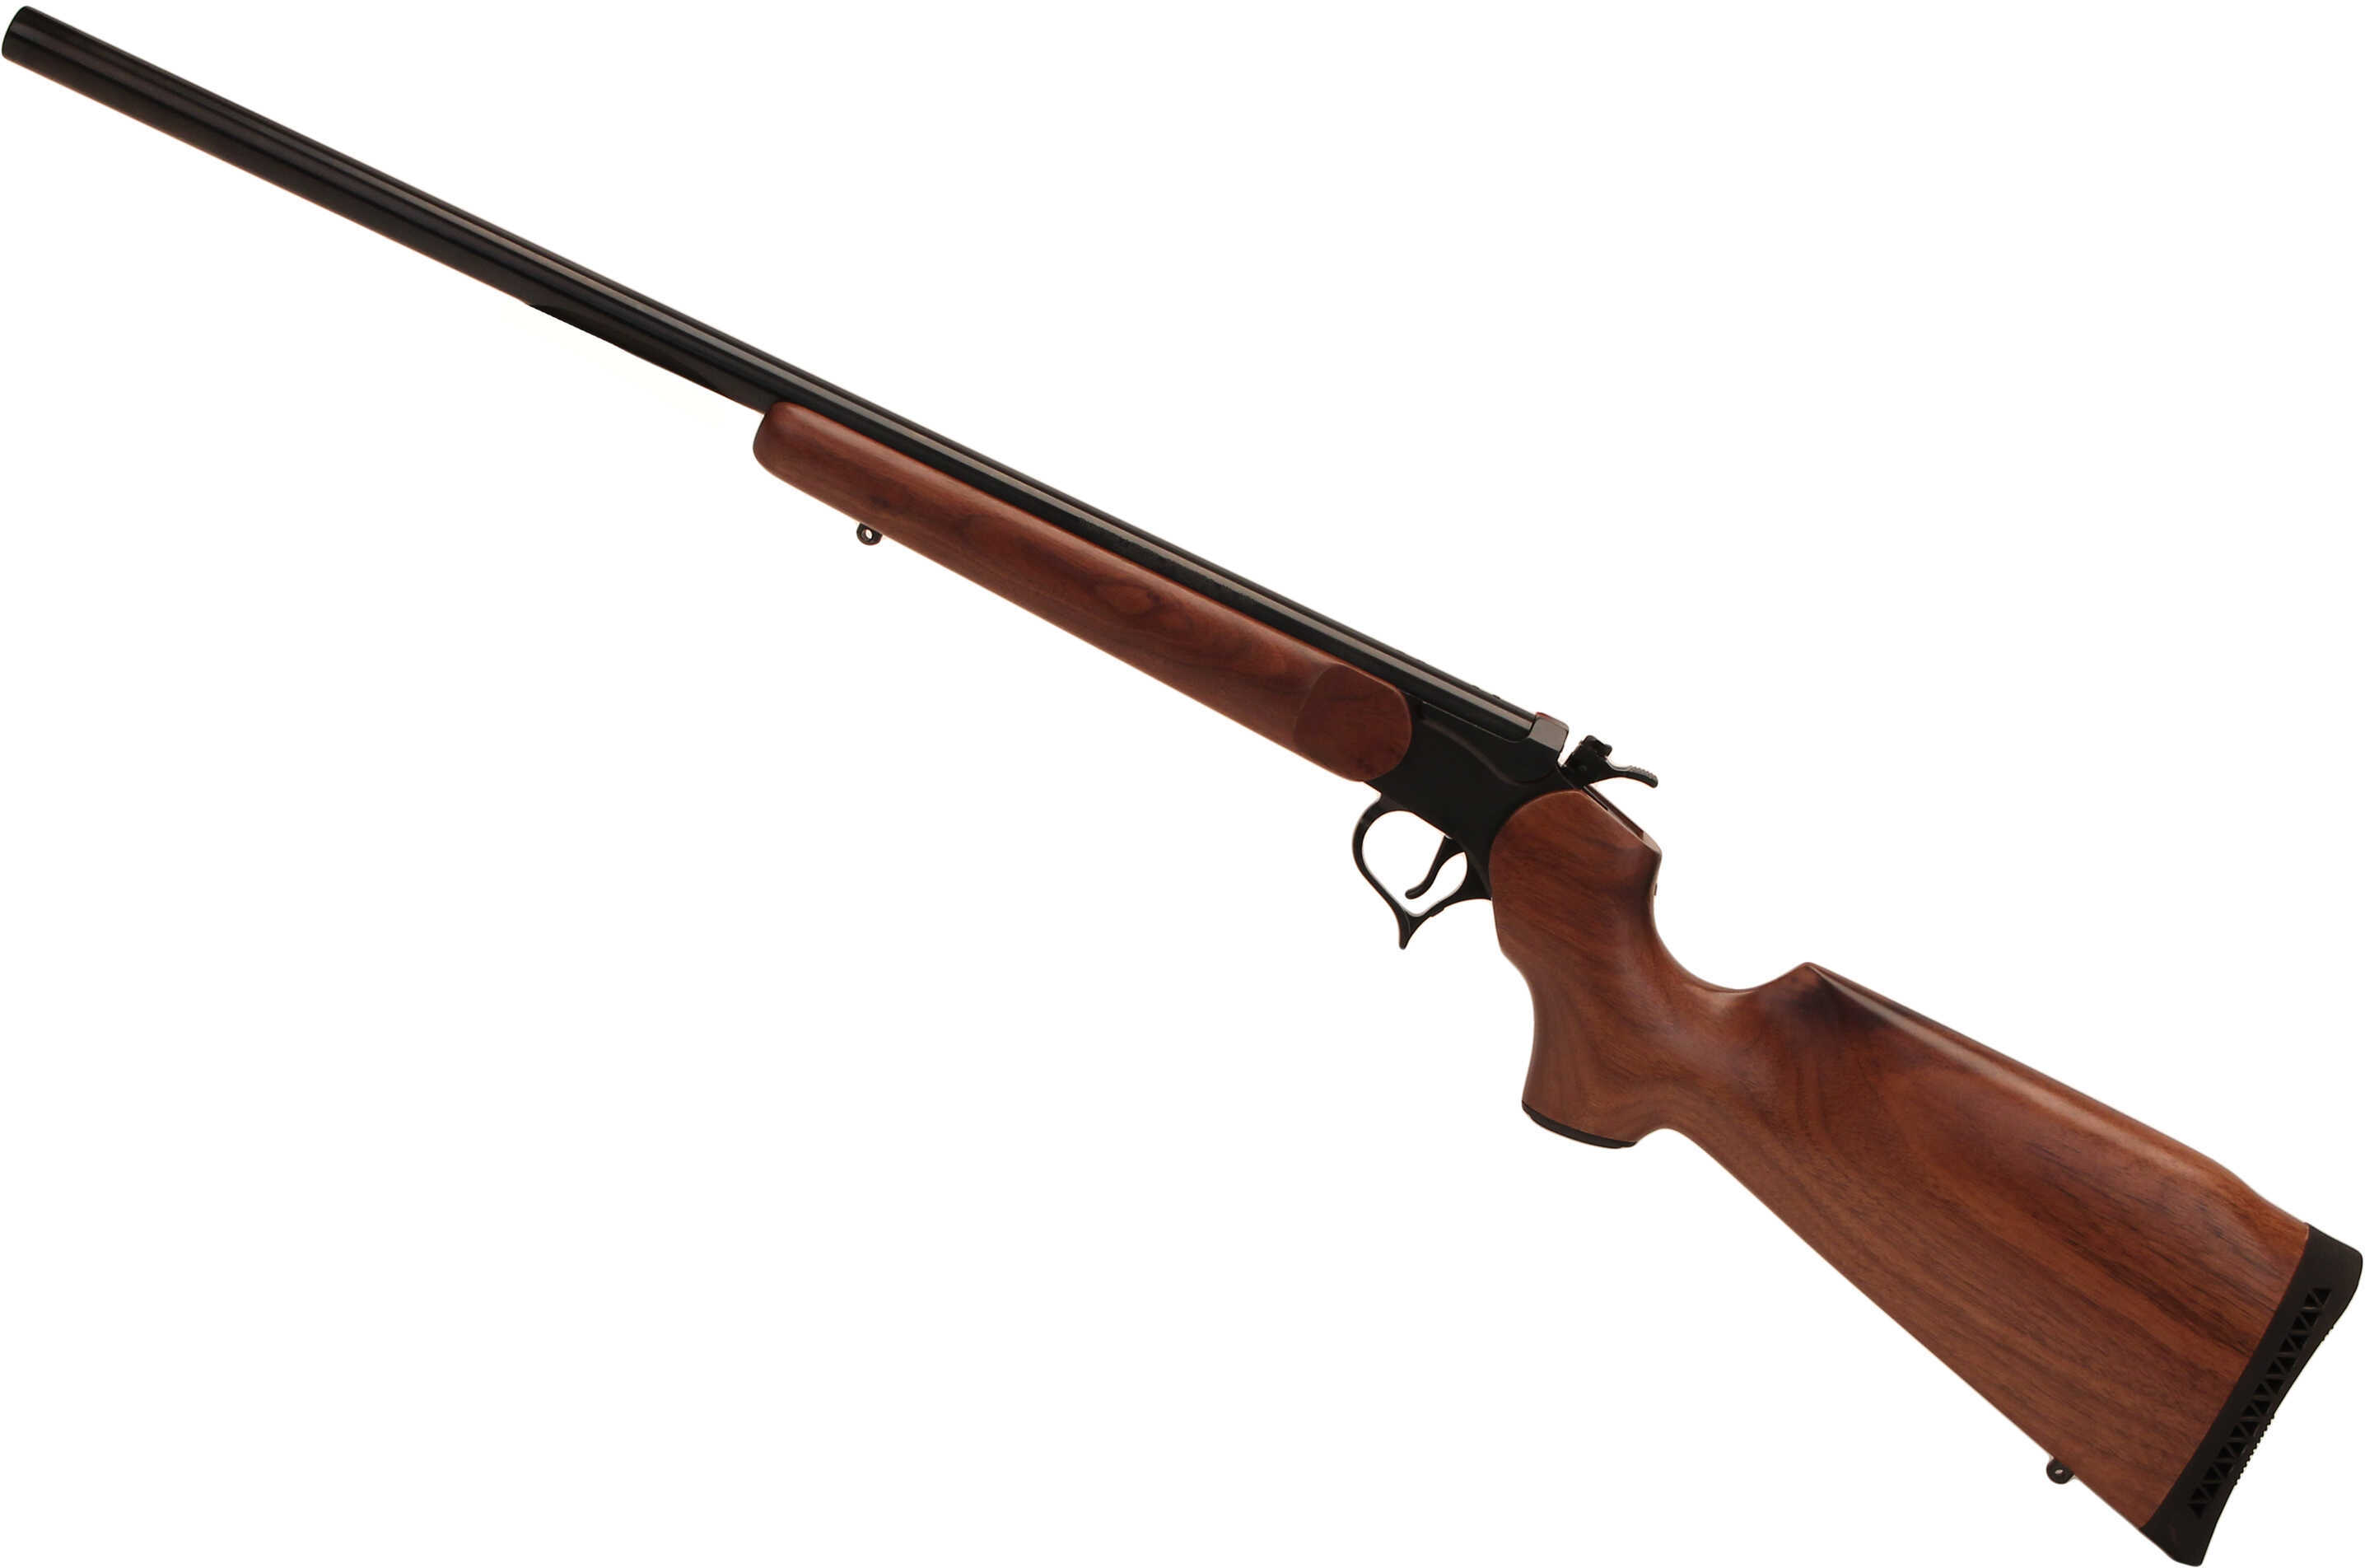 Thompson/Center Arms Rifle G2 Contentder 30-30 Winchester 23" Blued Barrel Armornite/Walnut Stock Scope and Rail Not Included